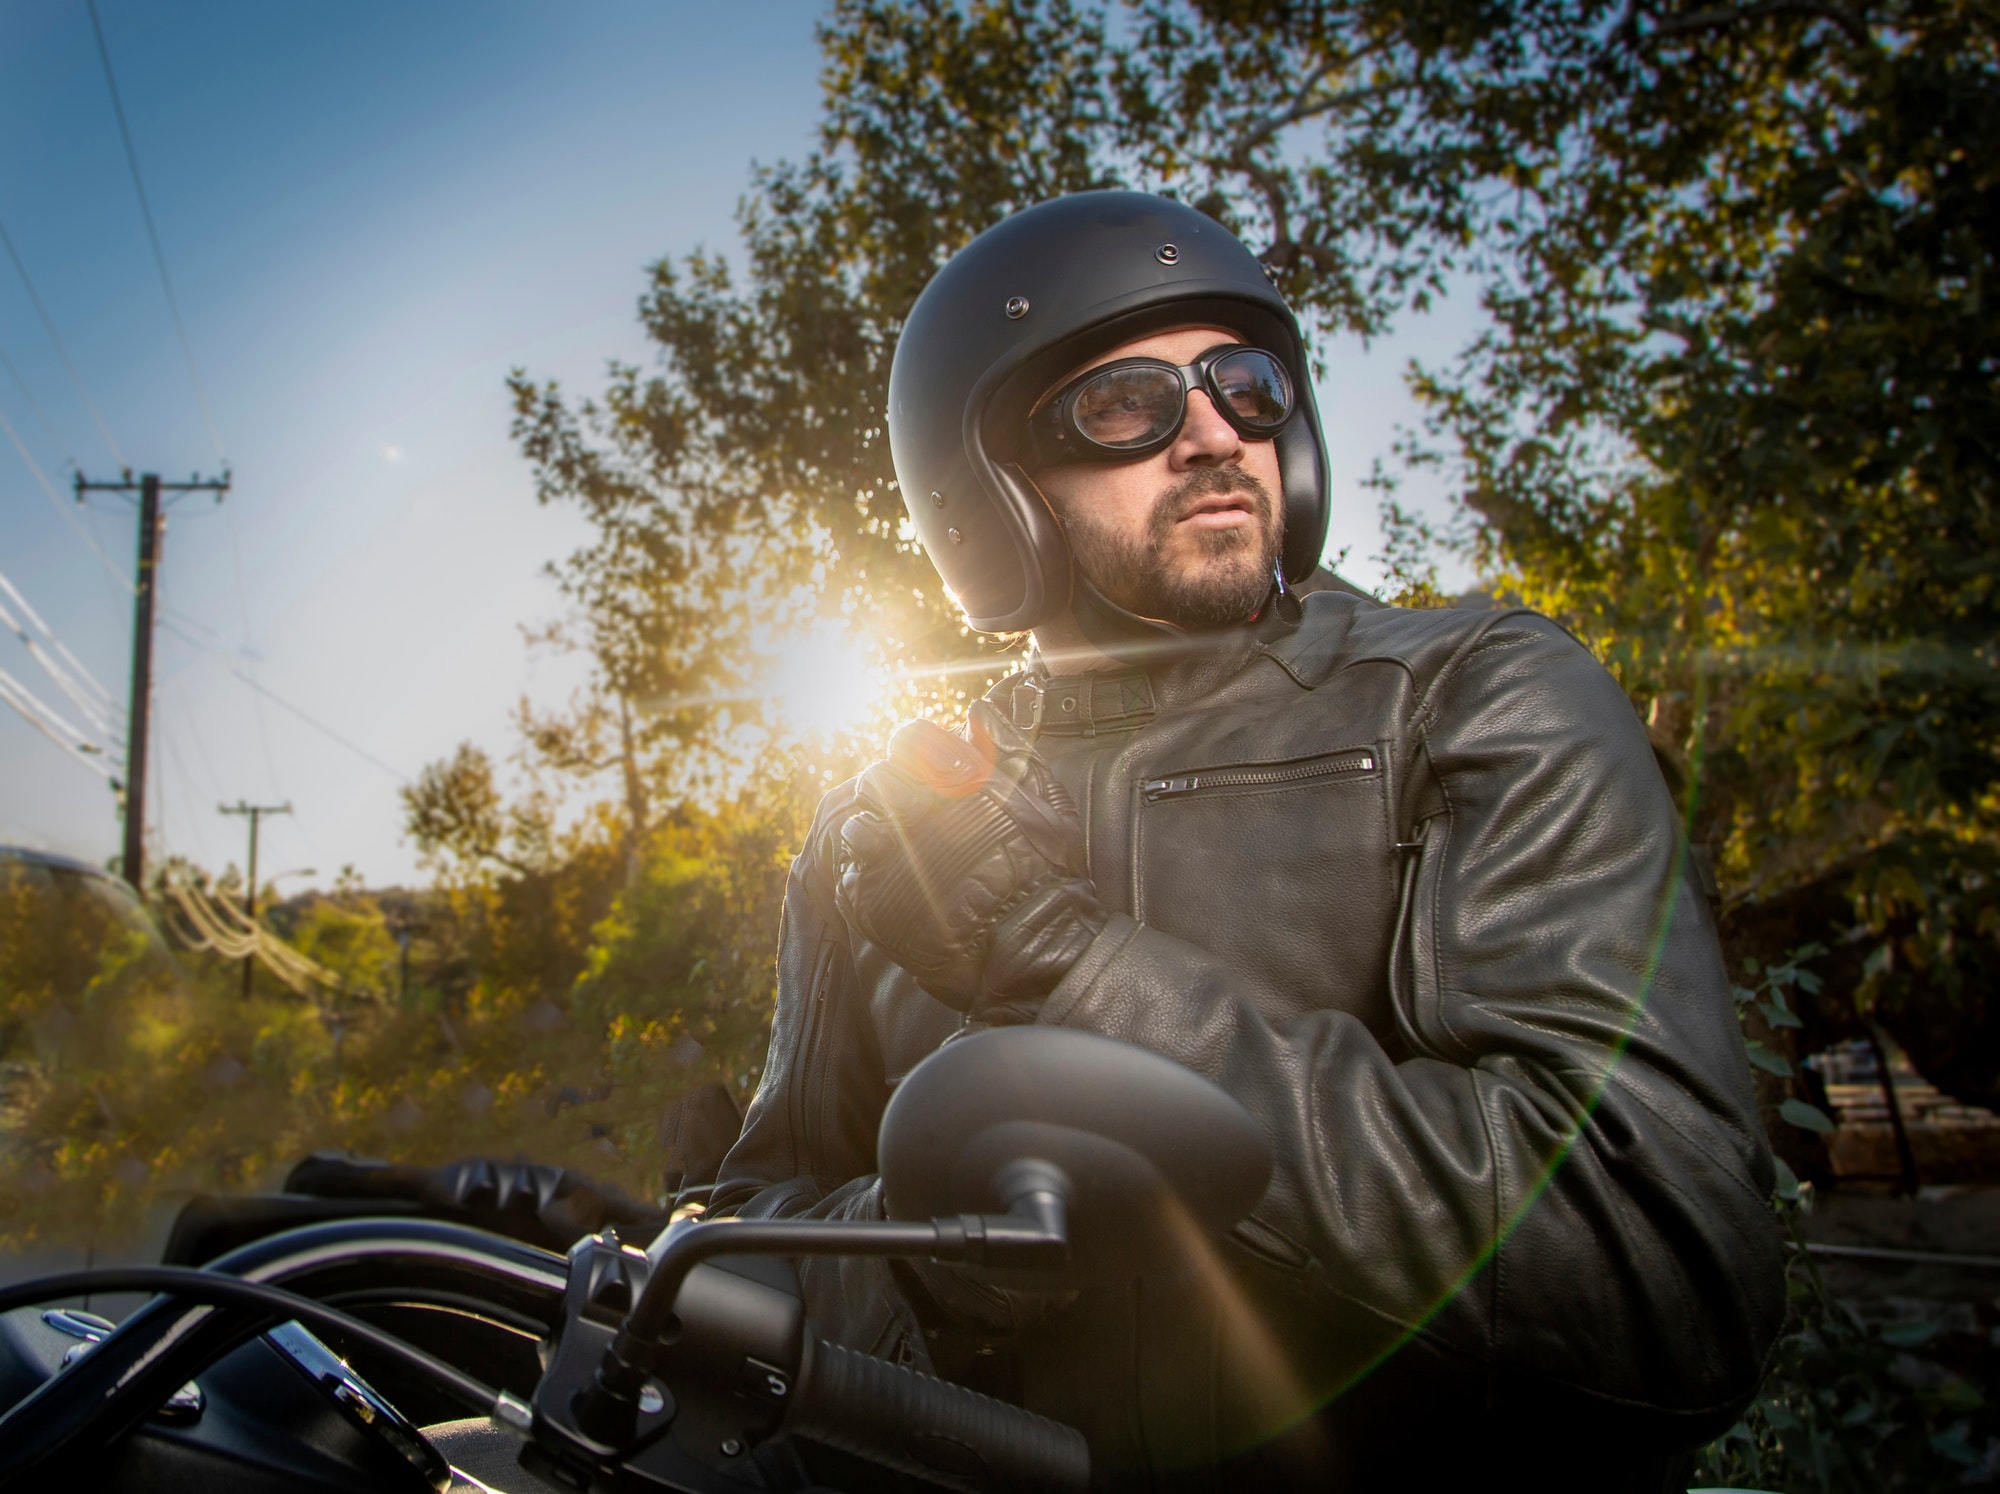 Motorcycle rider looking camera right wearing leather jacket, gloves, goggles and helmet